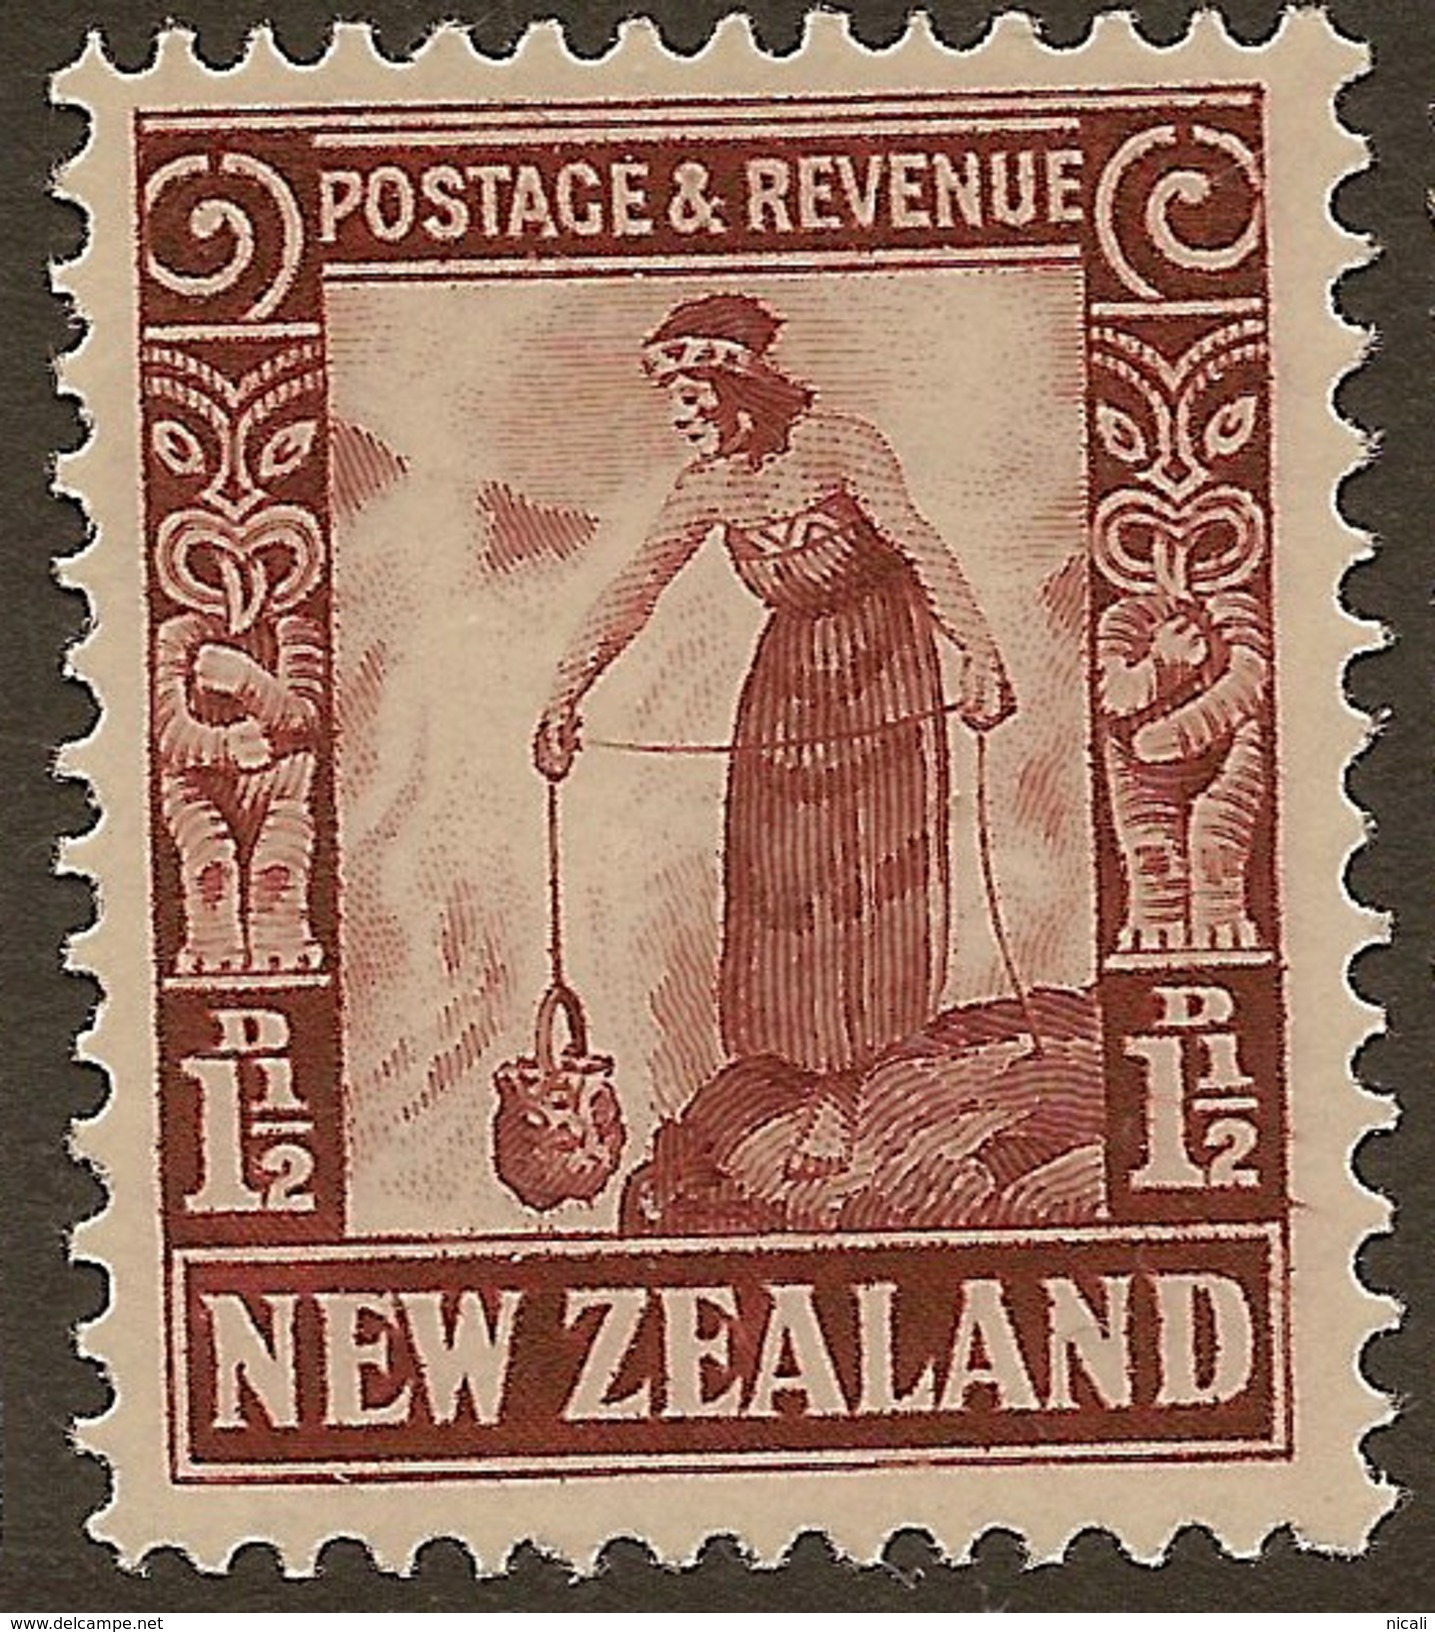 NZ 1935 1 1/2d Maori Cooking SG 558 HM #WQ243 - Unused Stamps